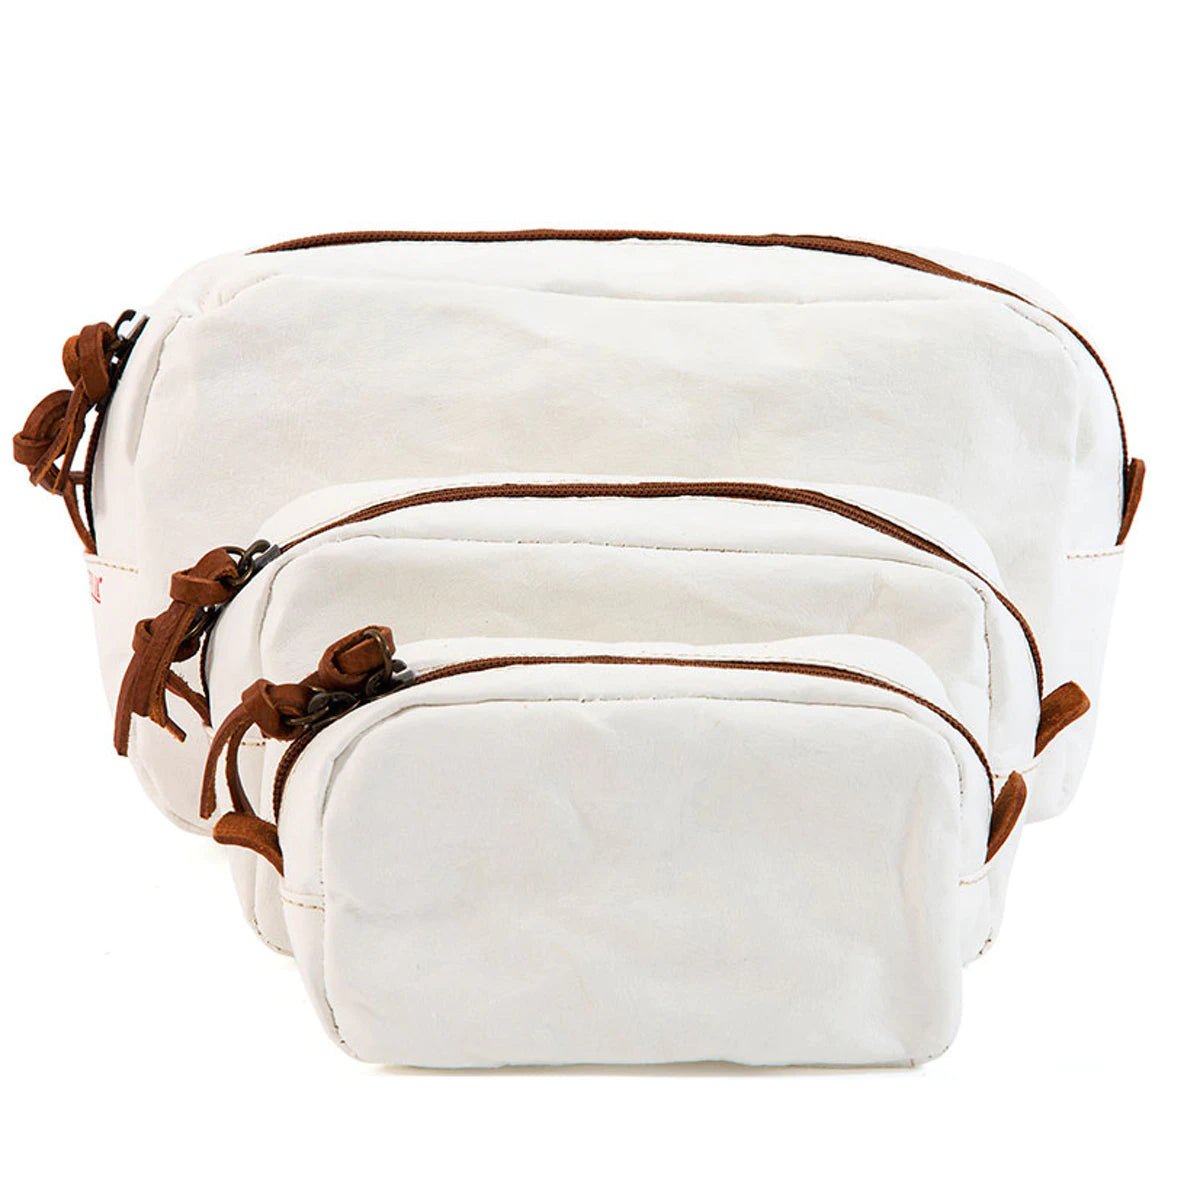 A set of three washable paper toiletry bags is shown. Each bag has a brown zip with a tan leather zip pull. The smallest bag is at the front, then the medium bag and the large size at the back. The bags shown are white in colour.